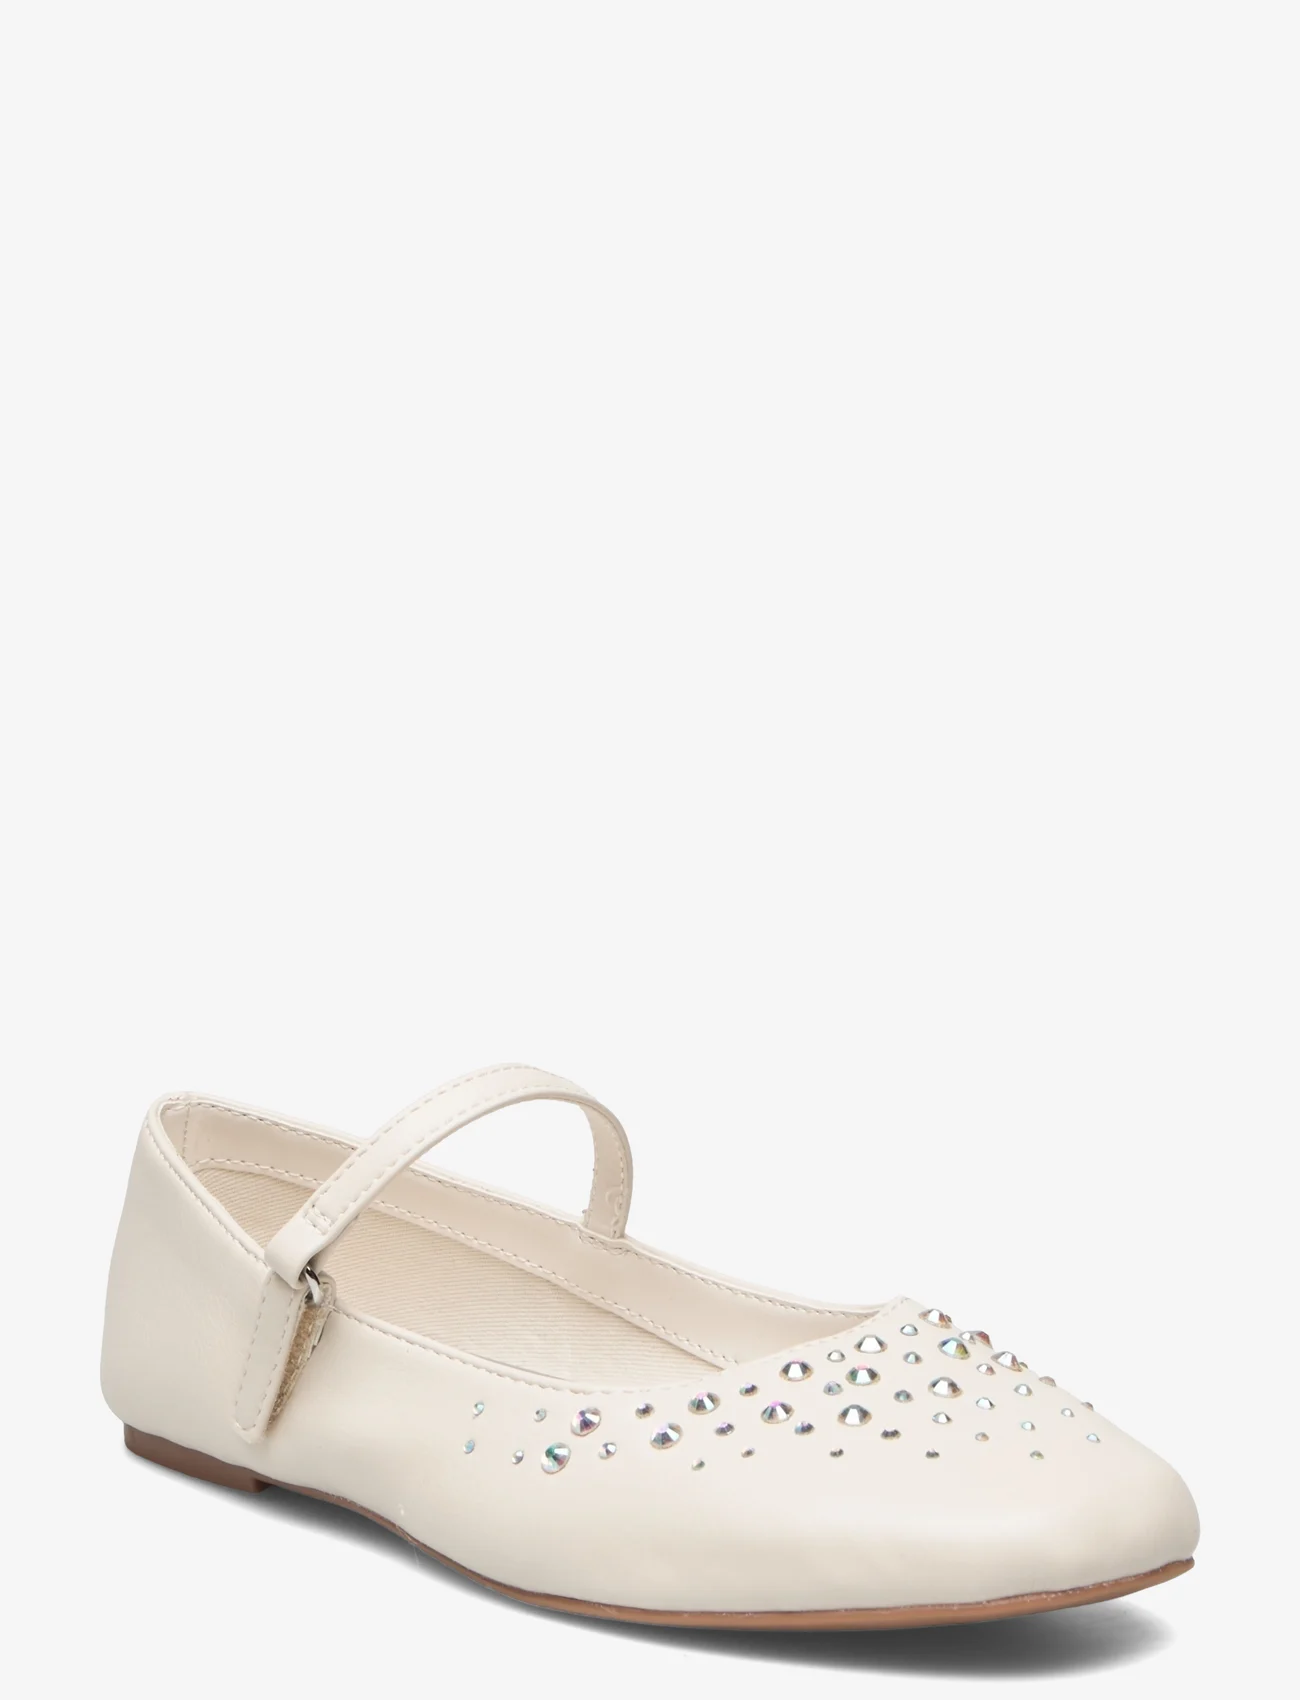 Mango - Lace-up ballerinas - sommarfynd - natural white - 0